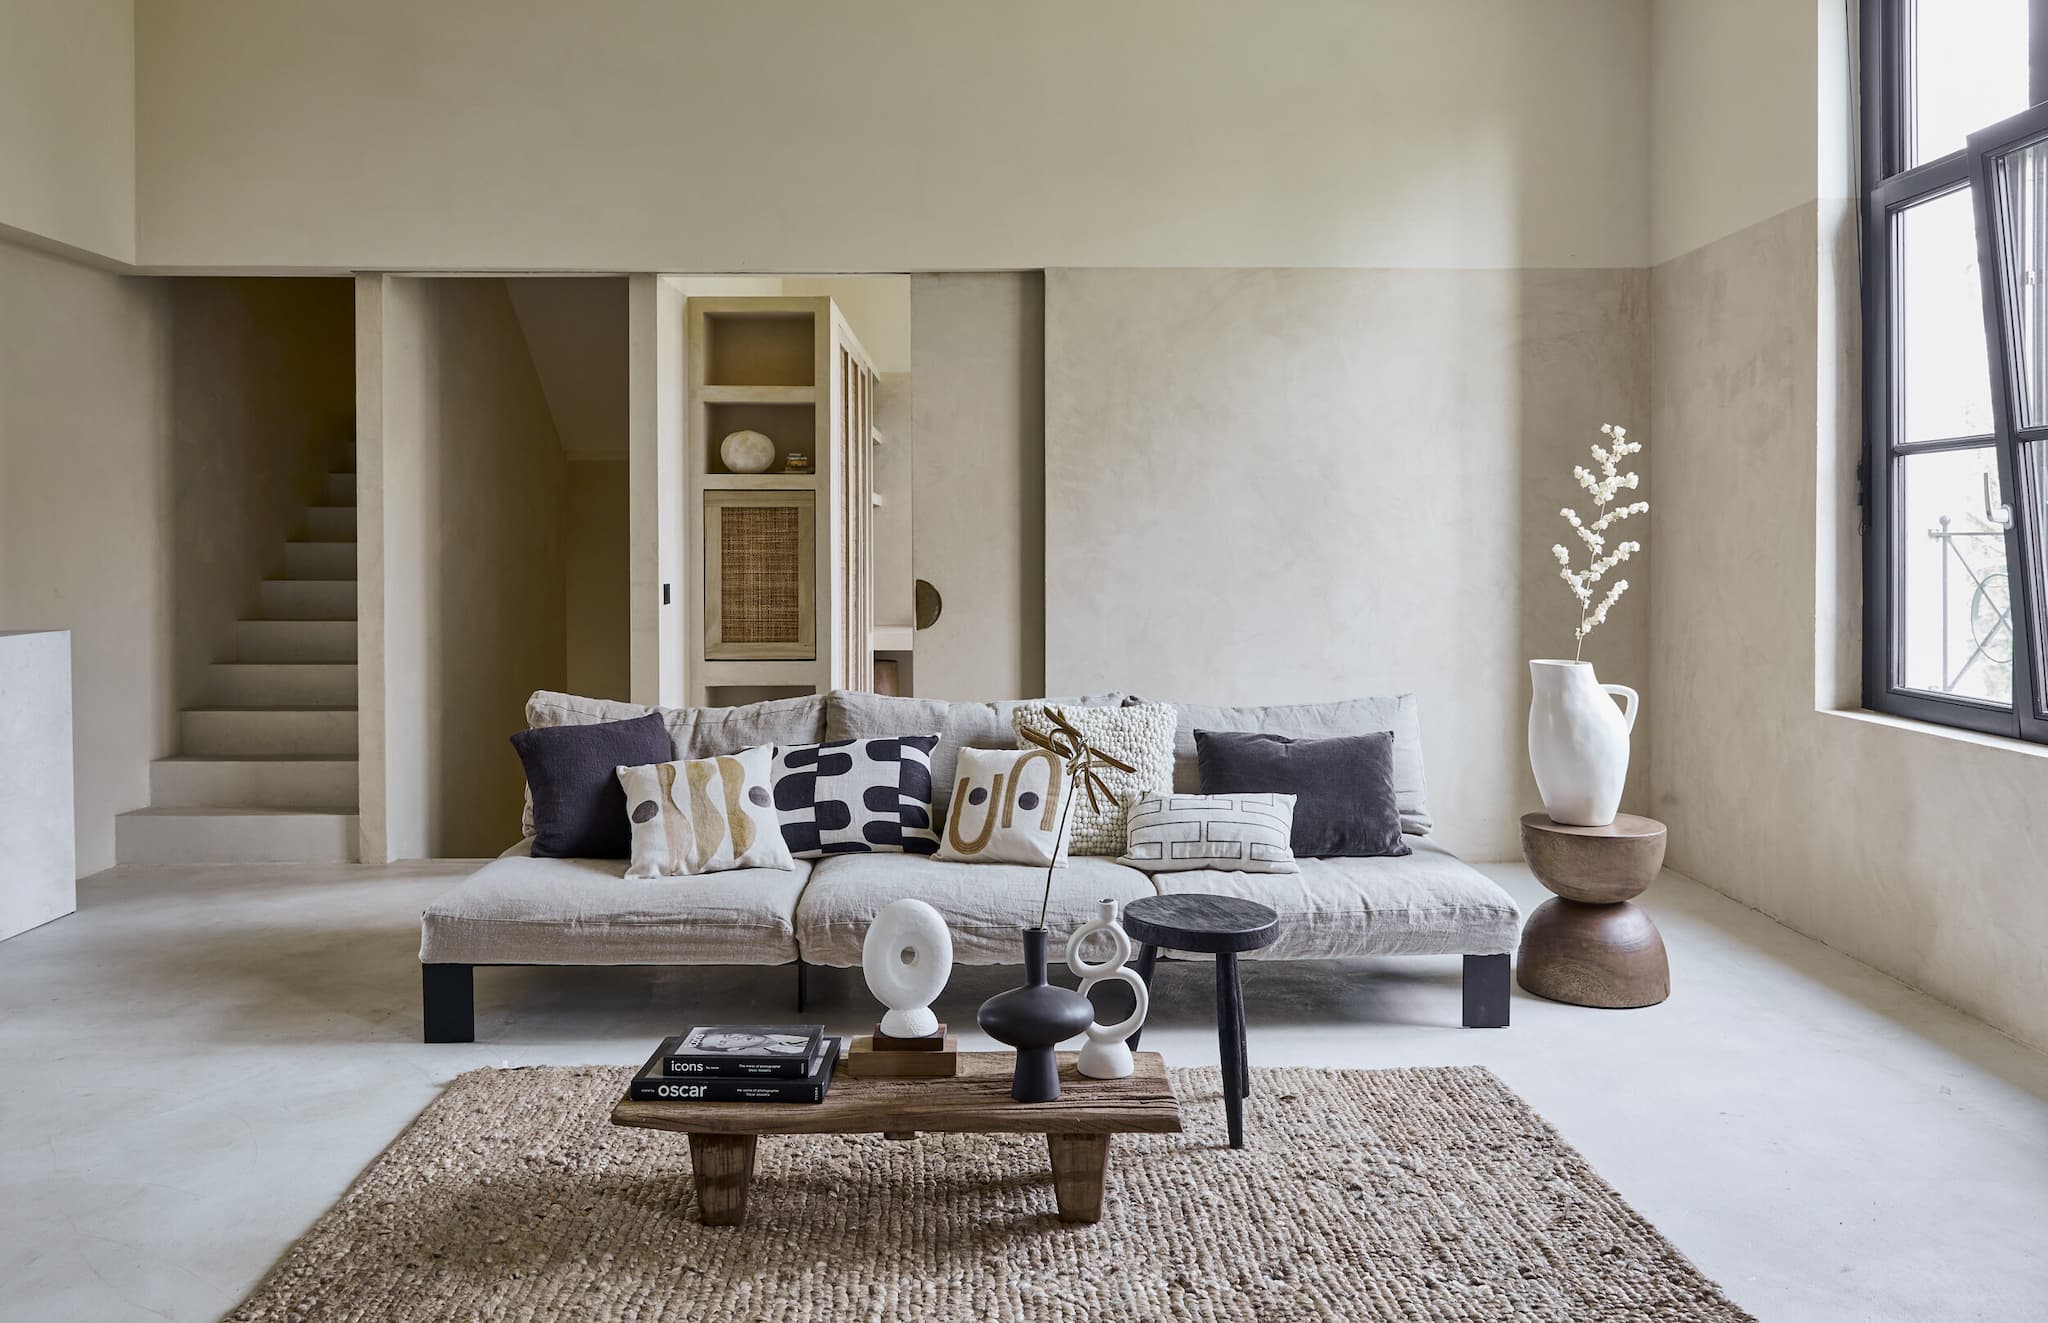 styling interior-styling prop-styling set-design Living room with cement walls and floors couch with light grey pillows, graphic throw pillows brown carpet white vase on wood side table